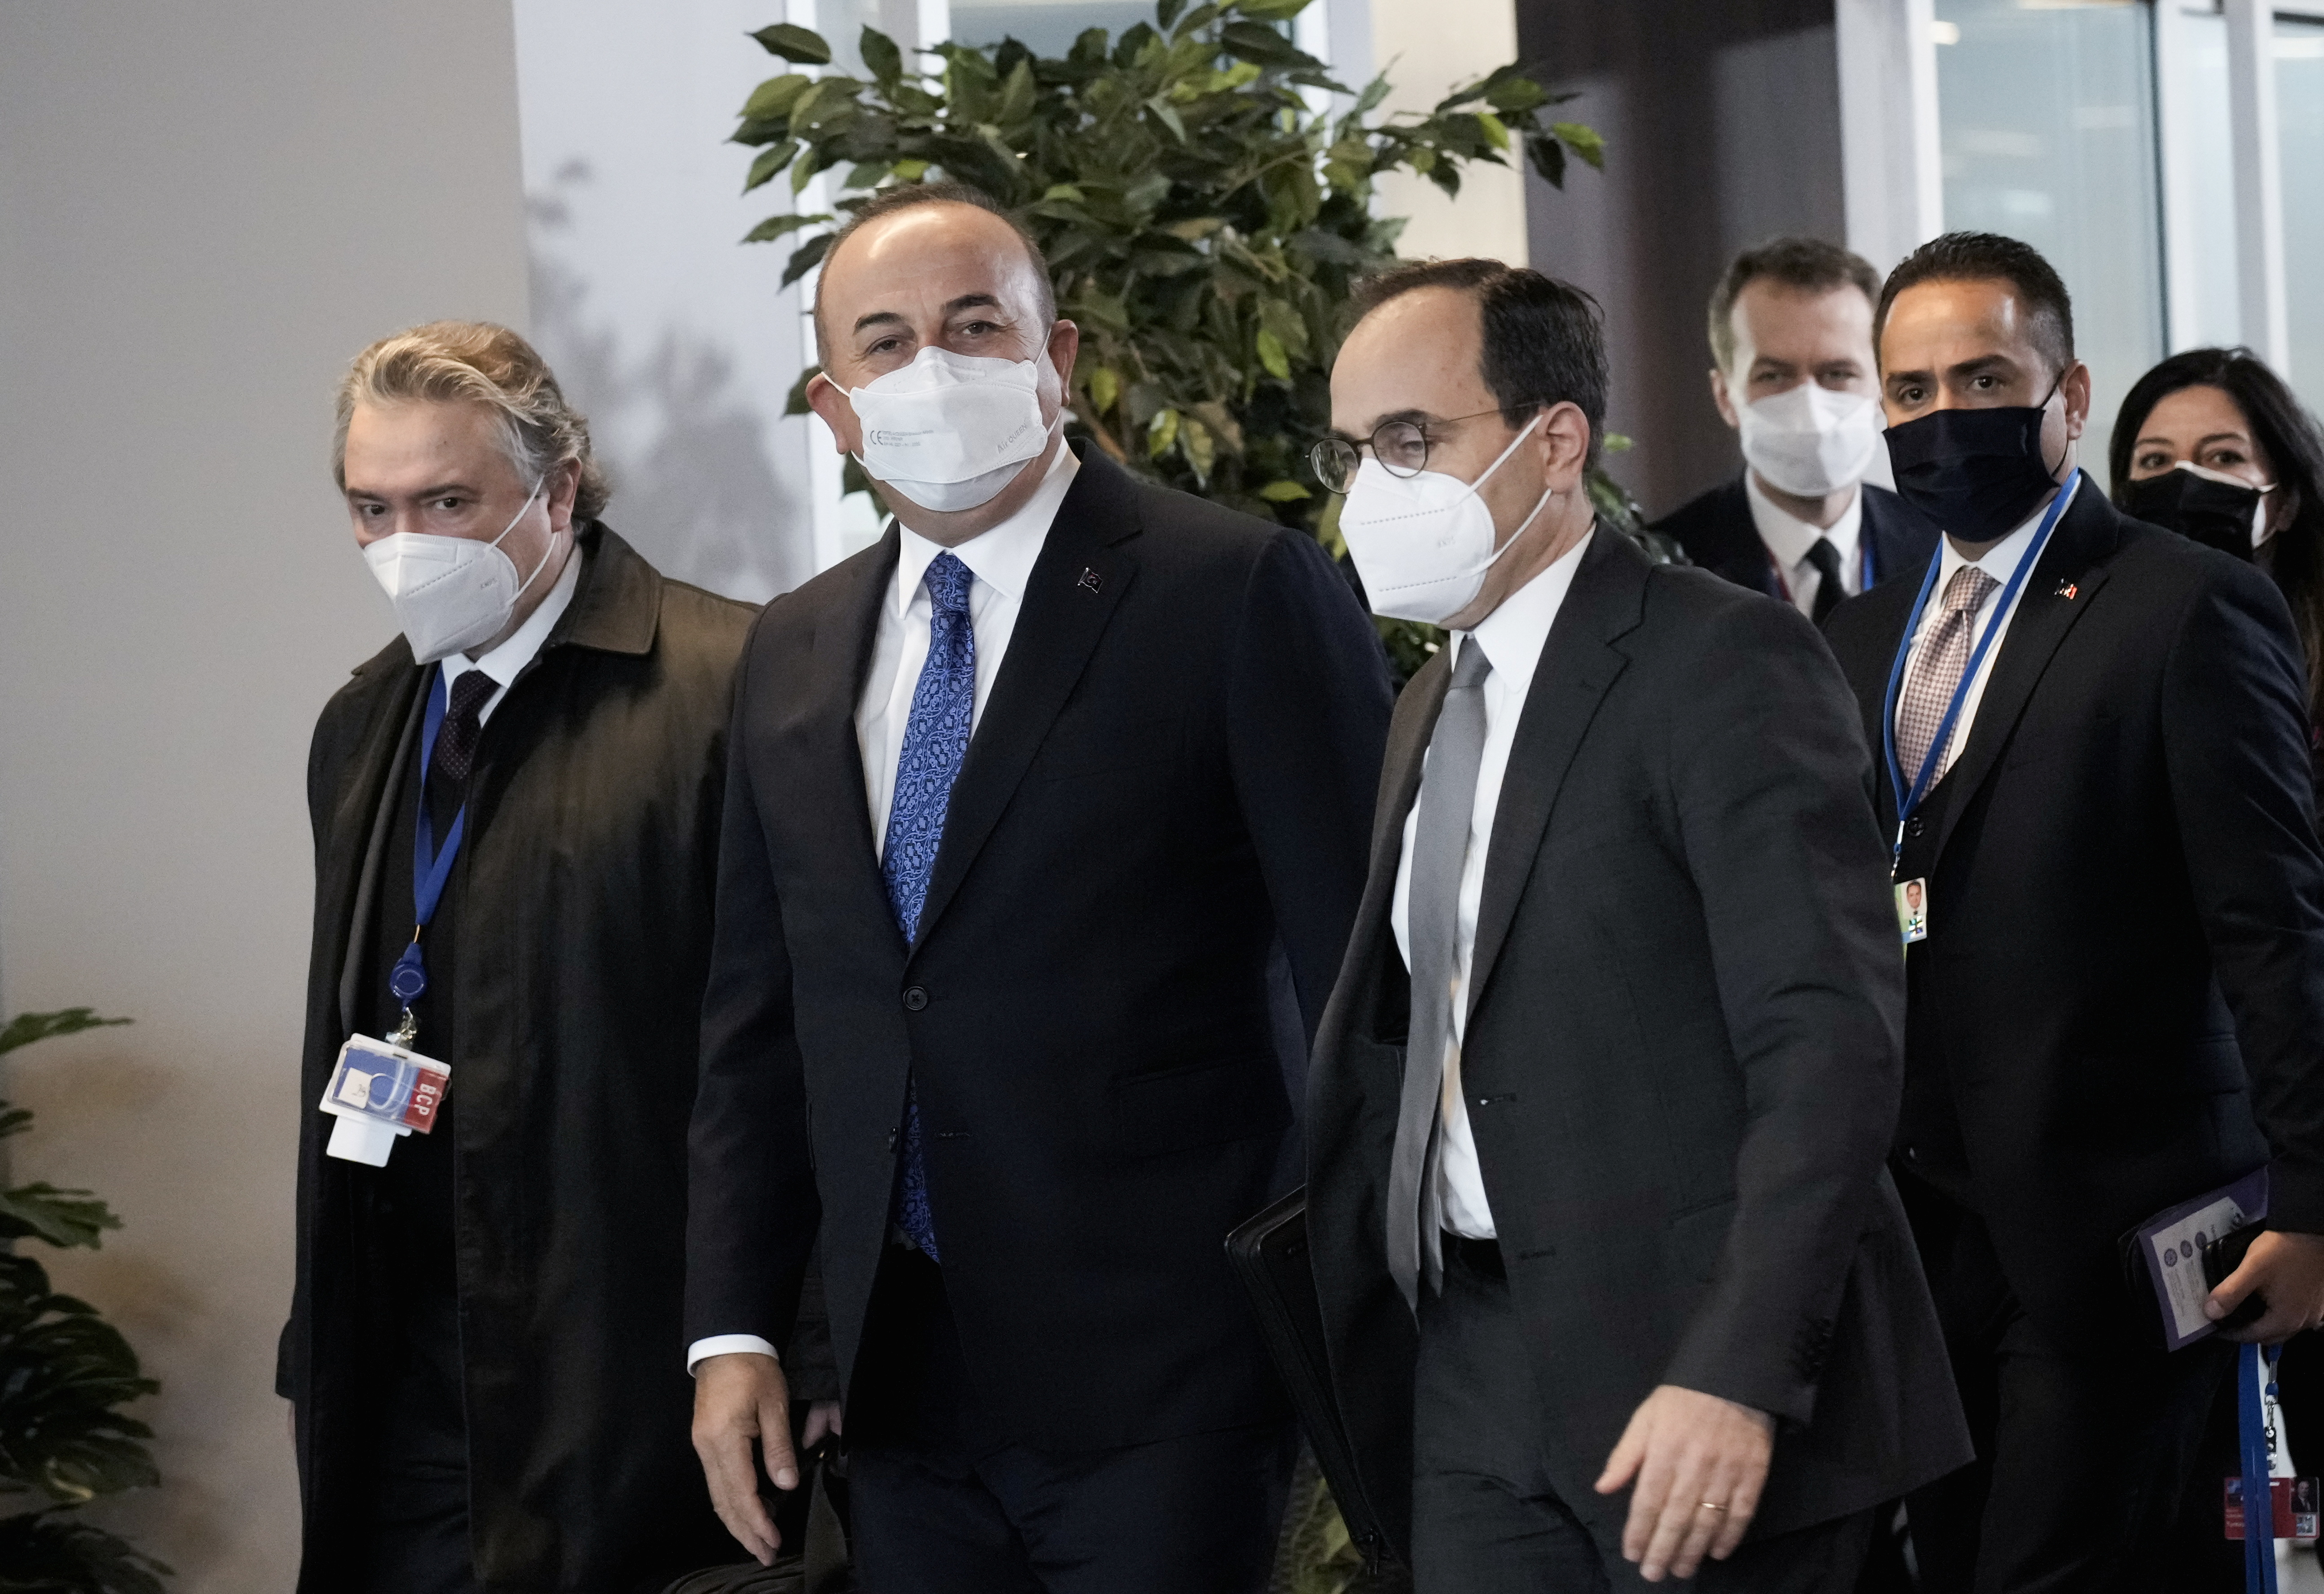 Turkish Foreign Minister Mevlut Cavusoglu arrives at the NATO Foreign Ministers summit in Riga, Latvia November 30, 2021. REUTERS/Ints Kalnins